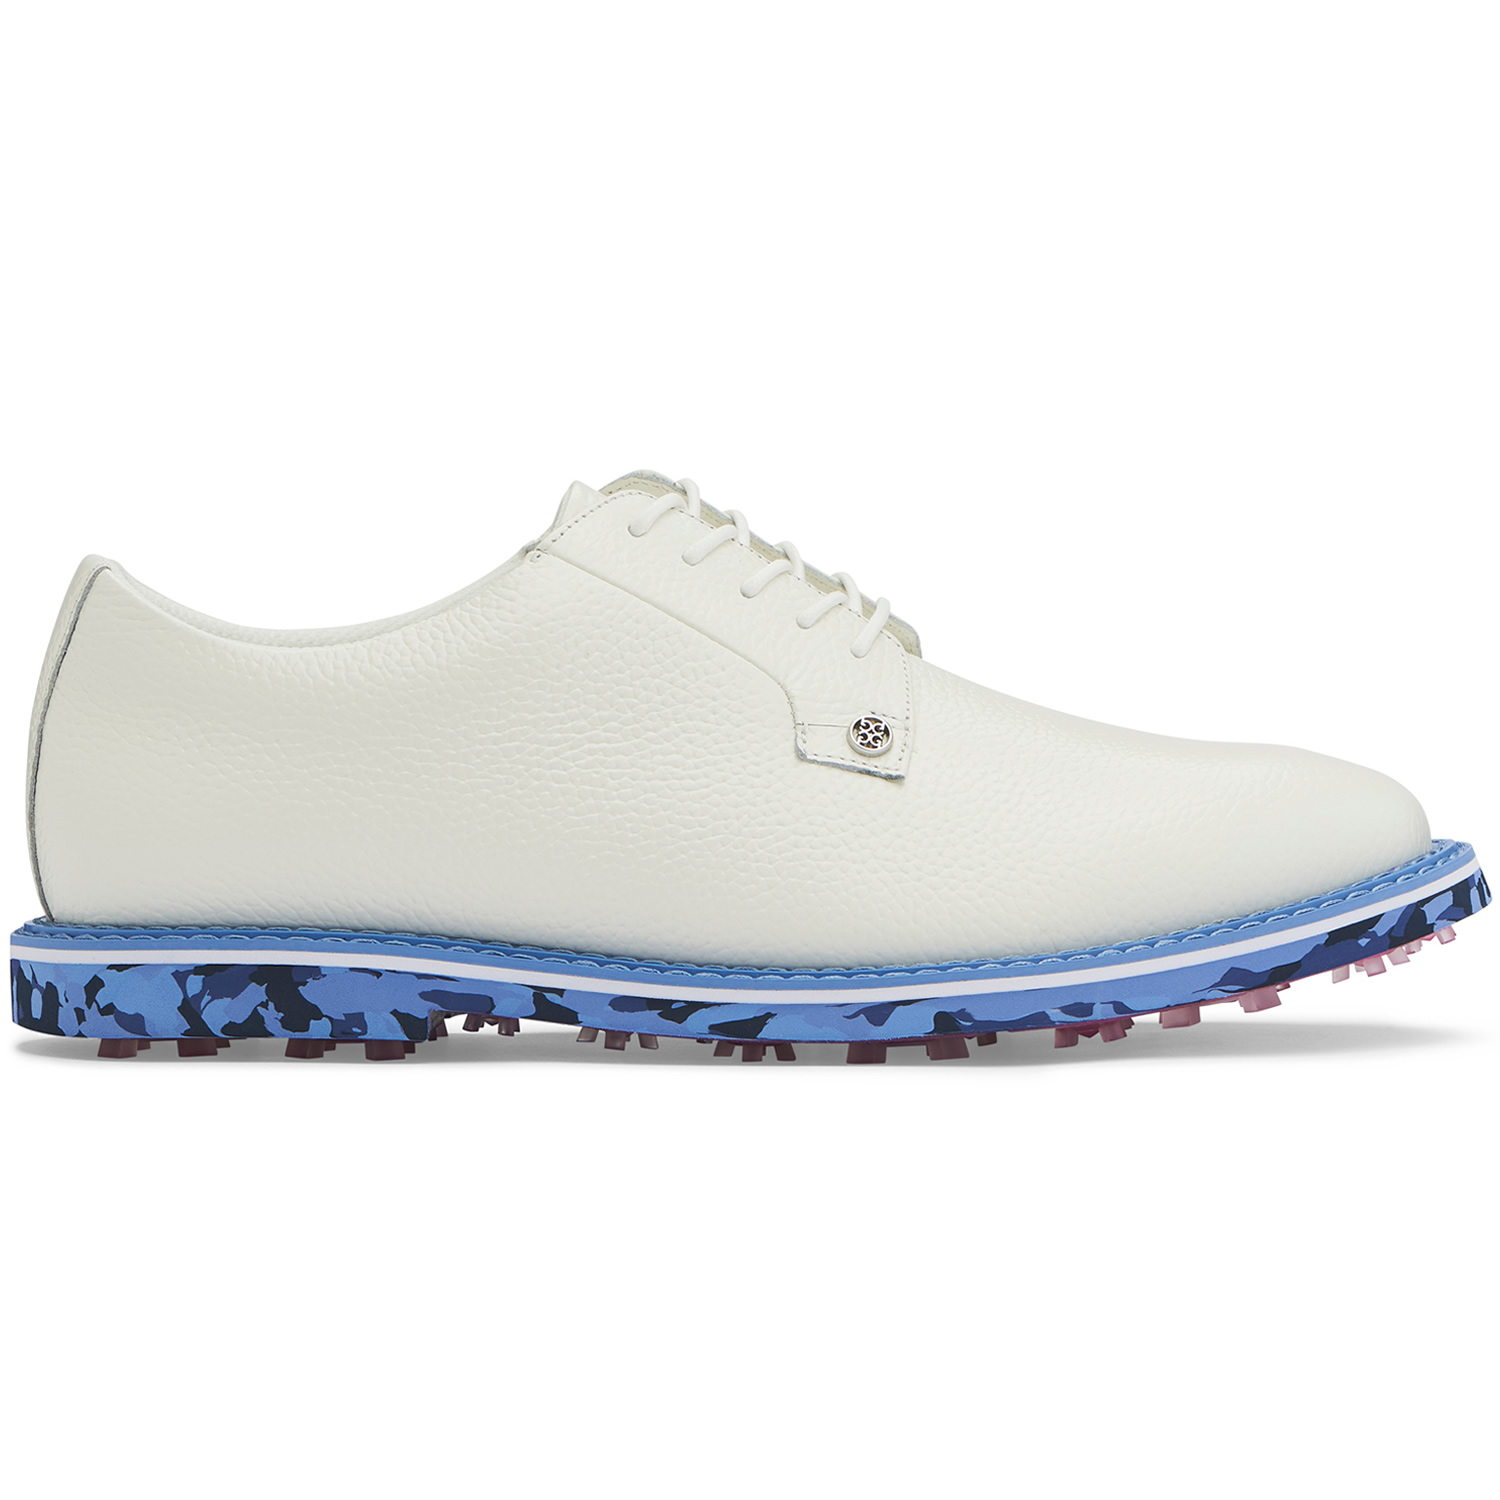 G/FORE Limited Edition Camo Gallivanter Golf Shoes